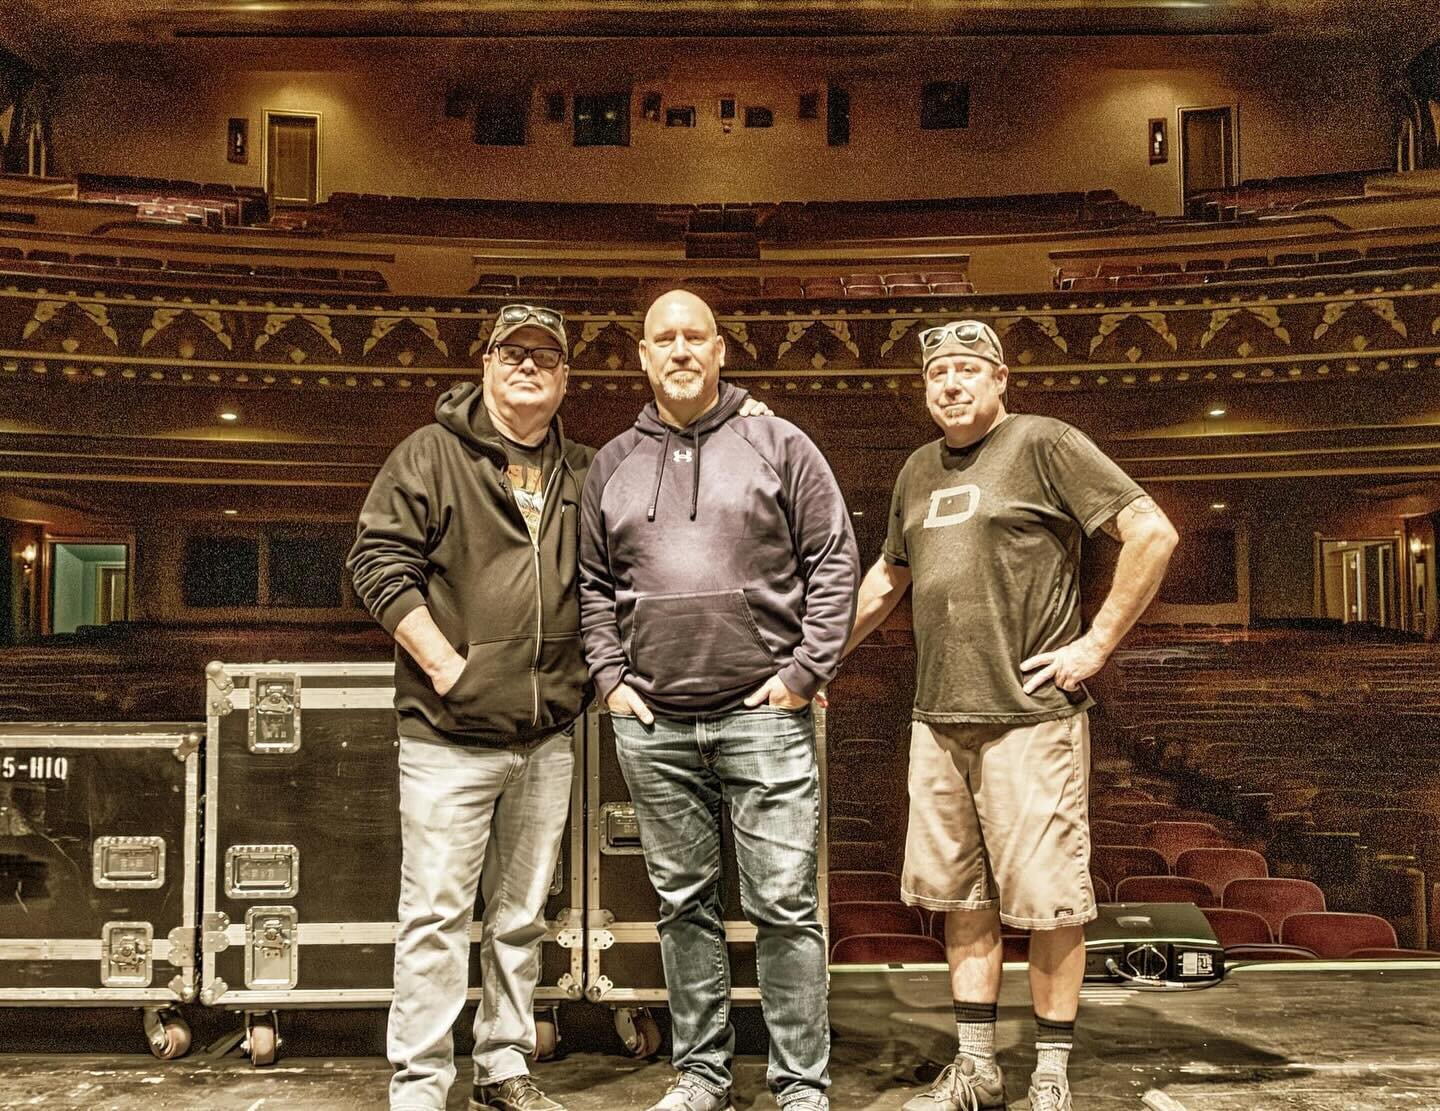 The calm before the storm!
With my Sinner bassist Sean Herrington &amp; Paramount drummer Kevin Rome at Historic Stiefel Theatre in Salina, KS!